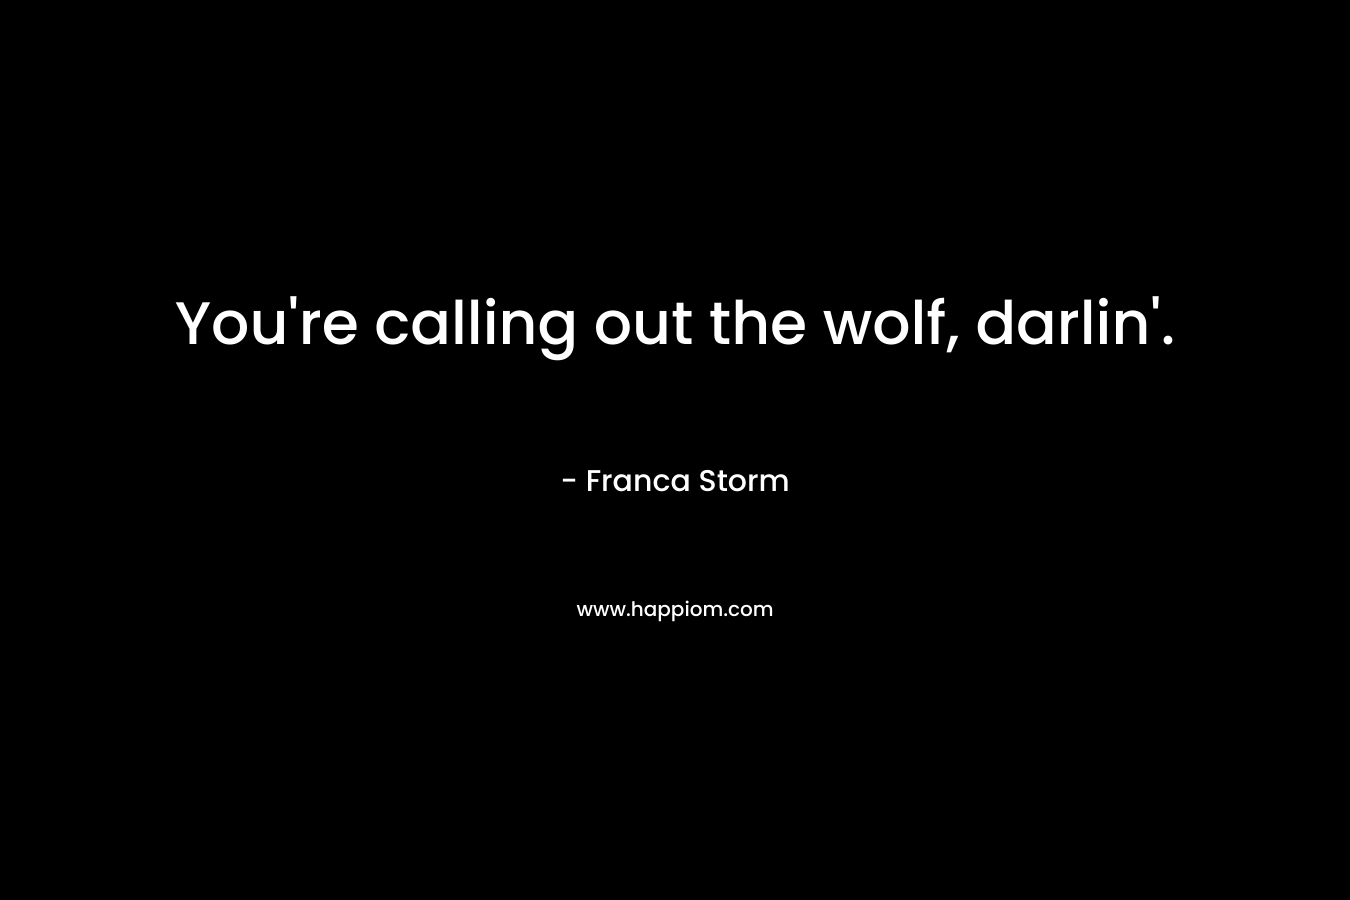 You’re calling out the wolf, darlin’. – Franca Storm